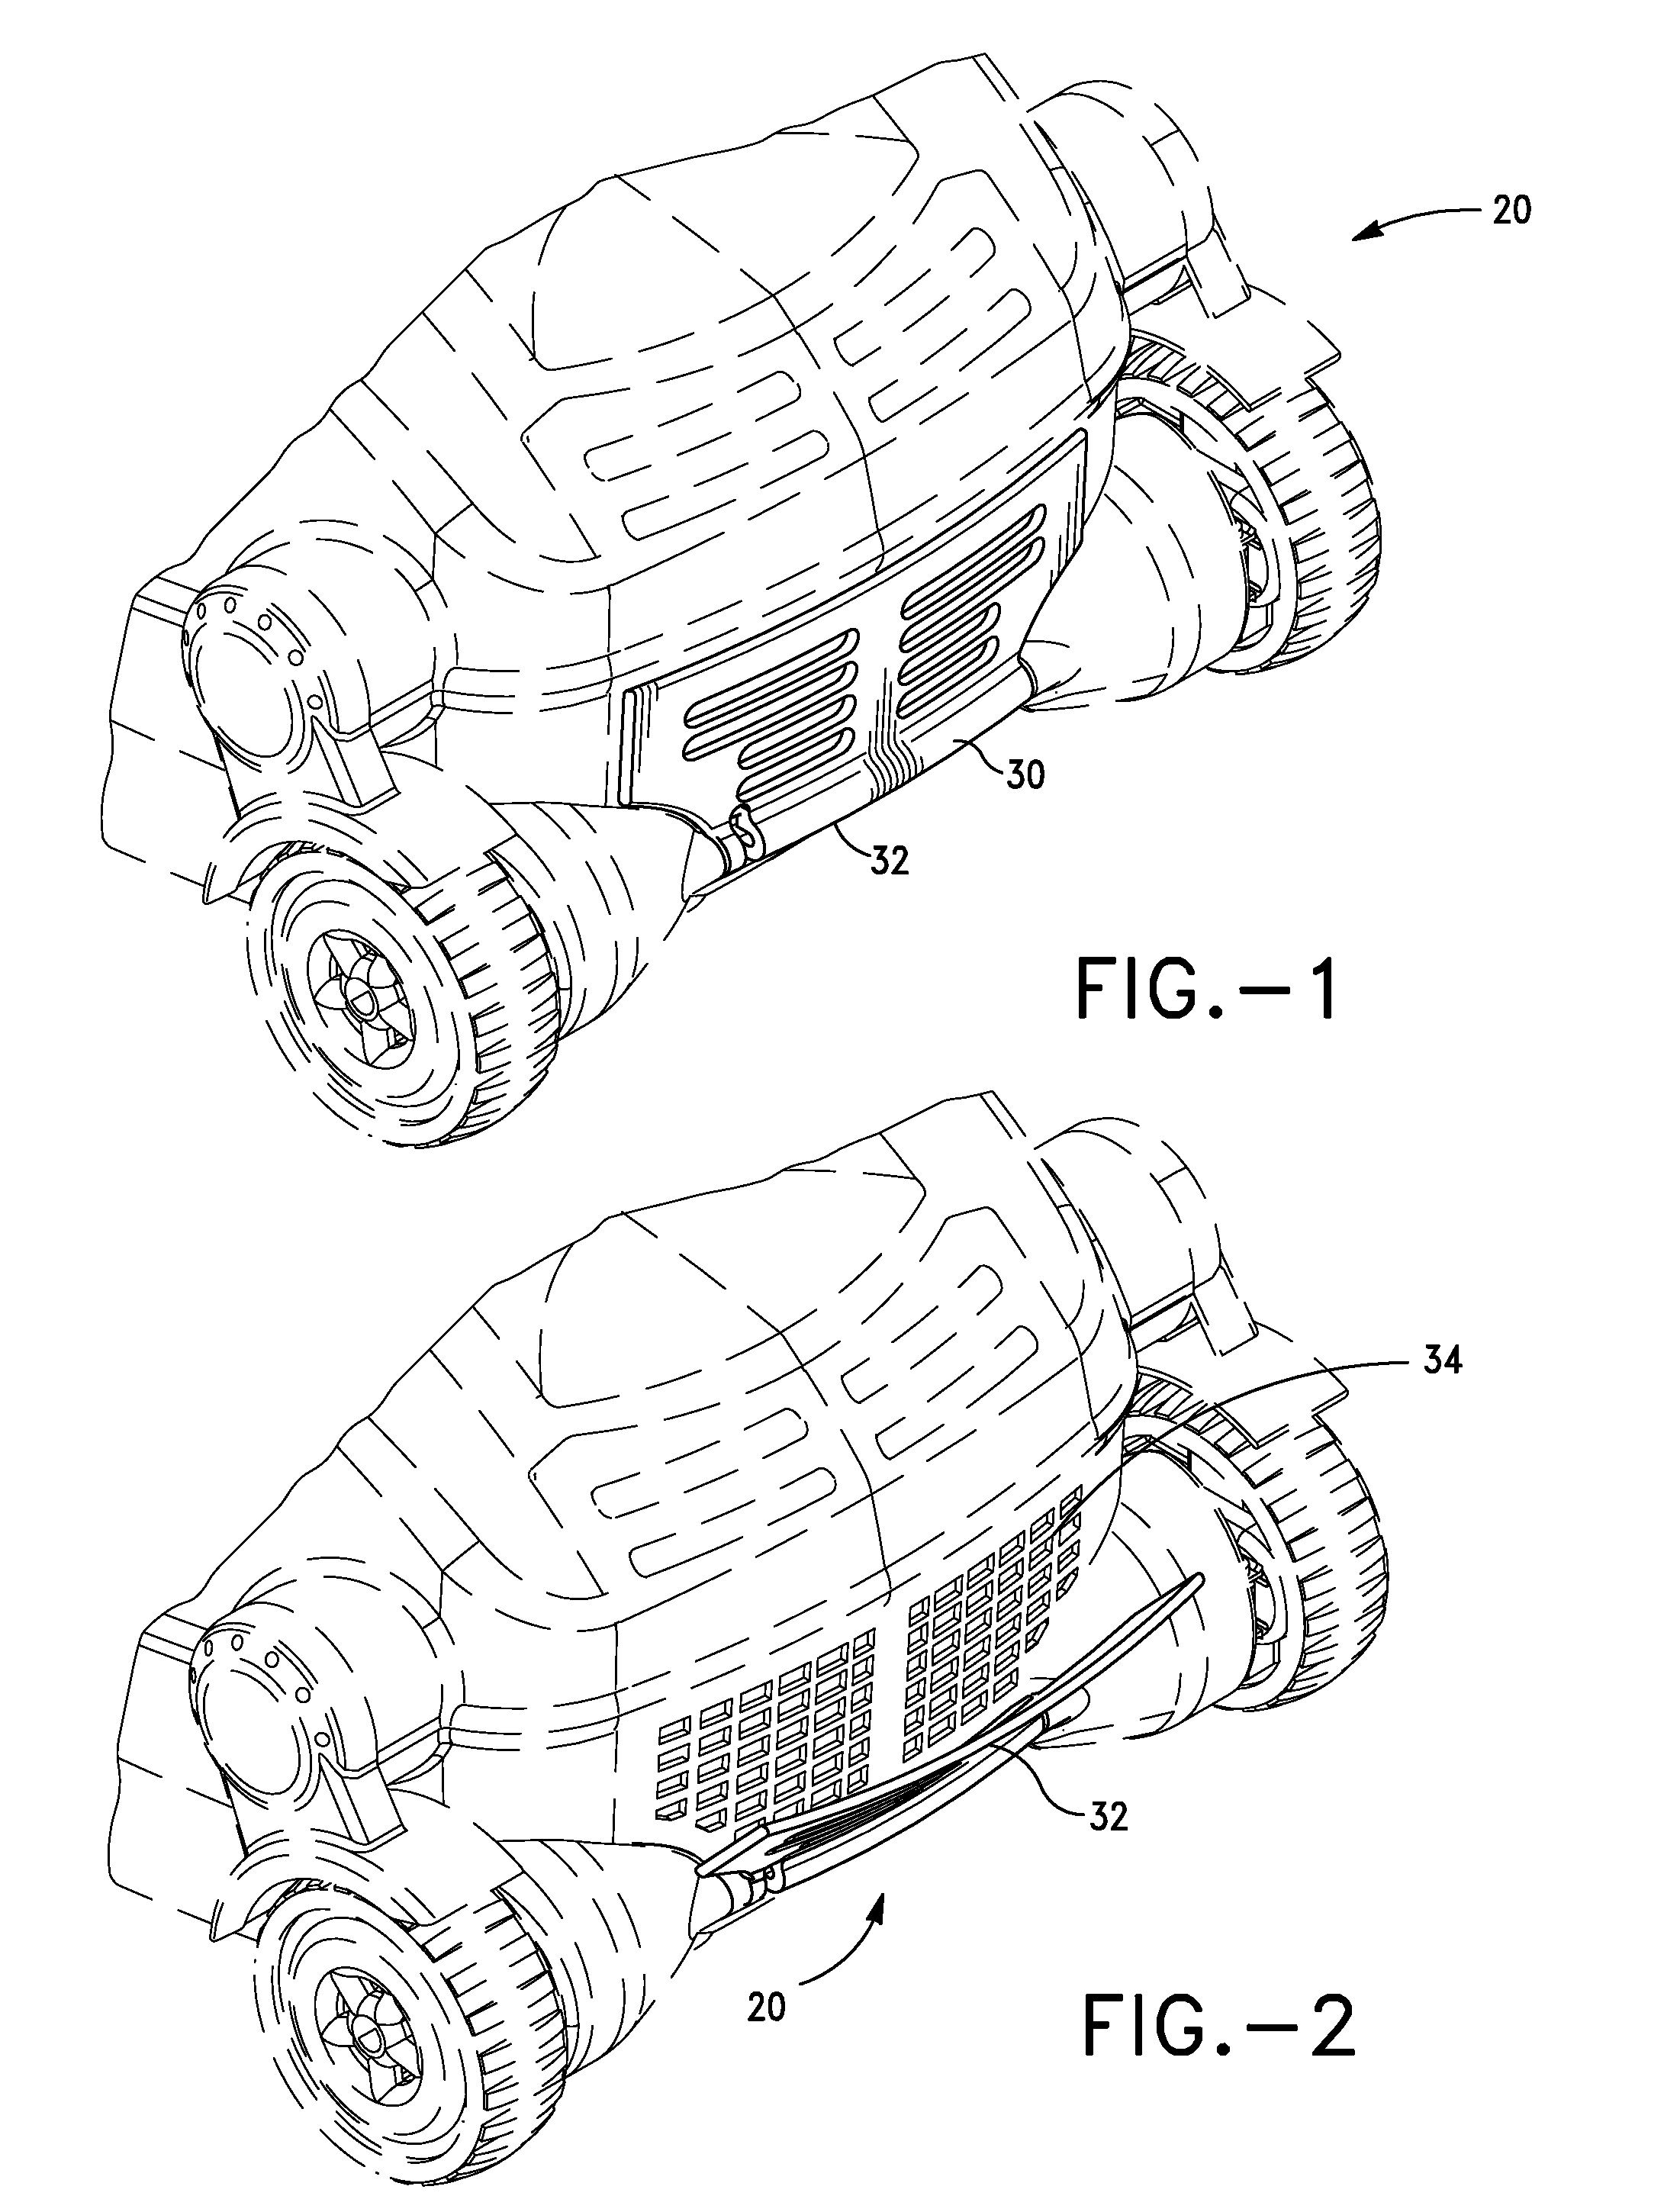 Pool cleaning vehicle having an advanced drain system